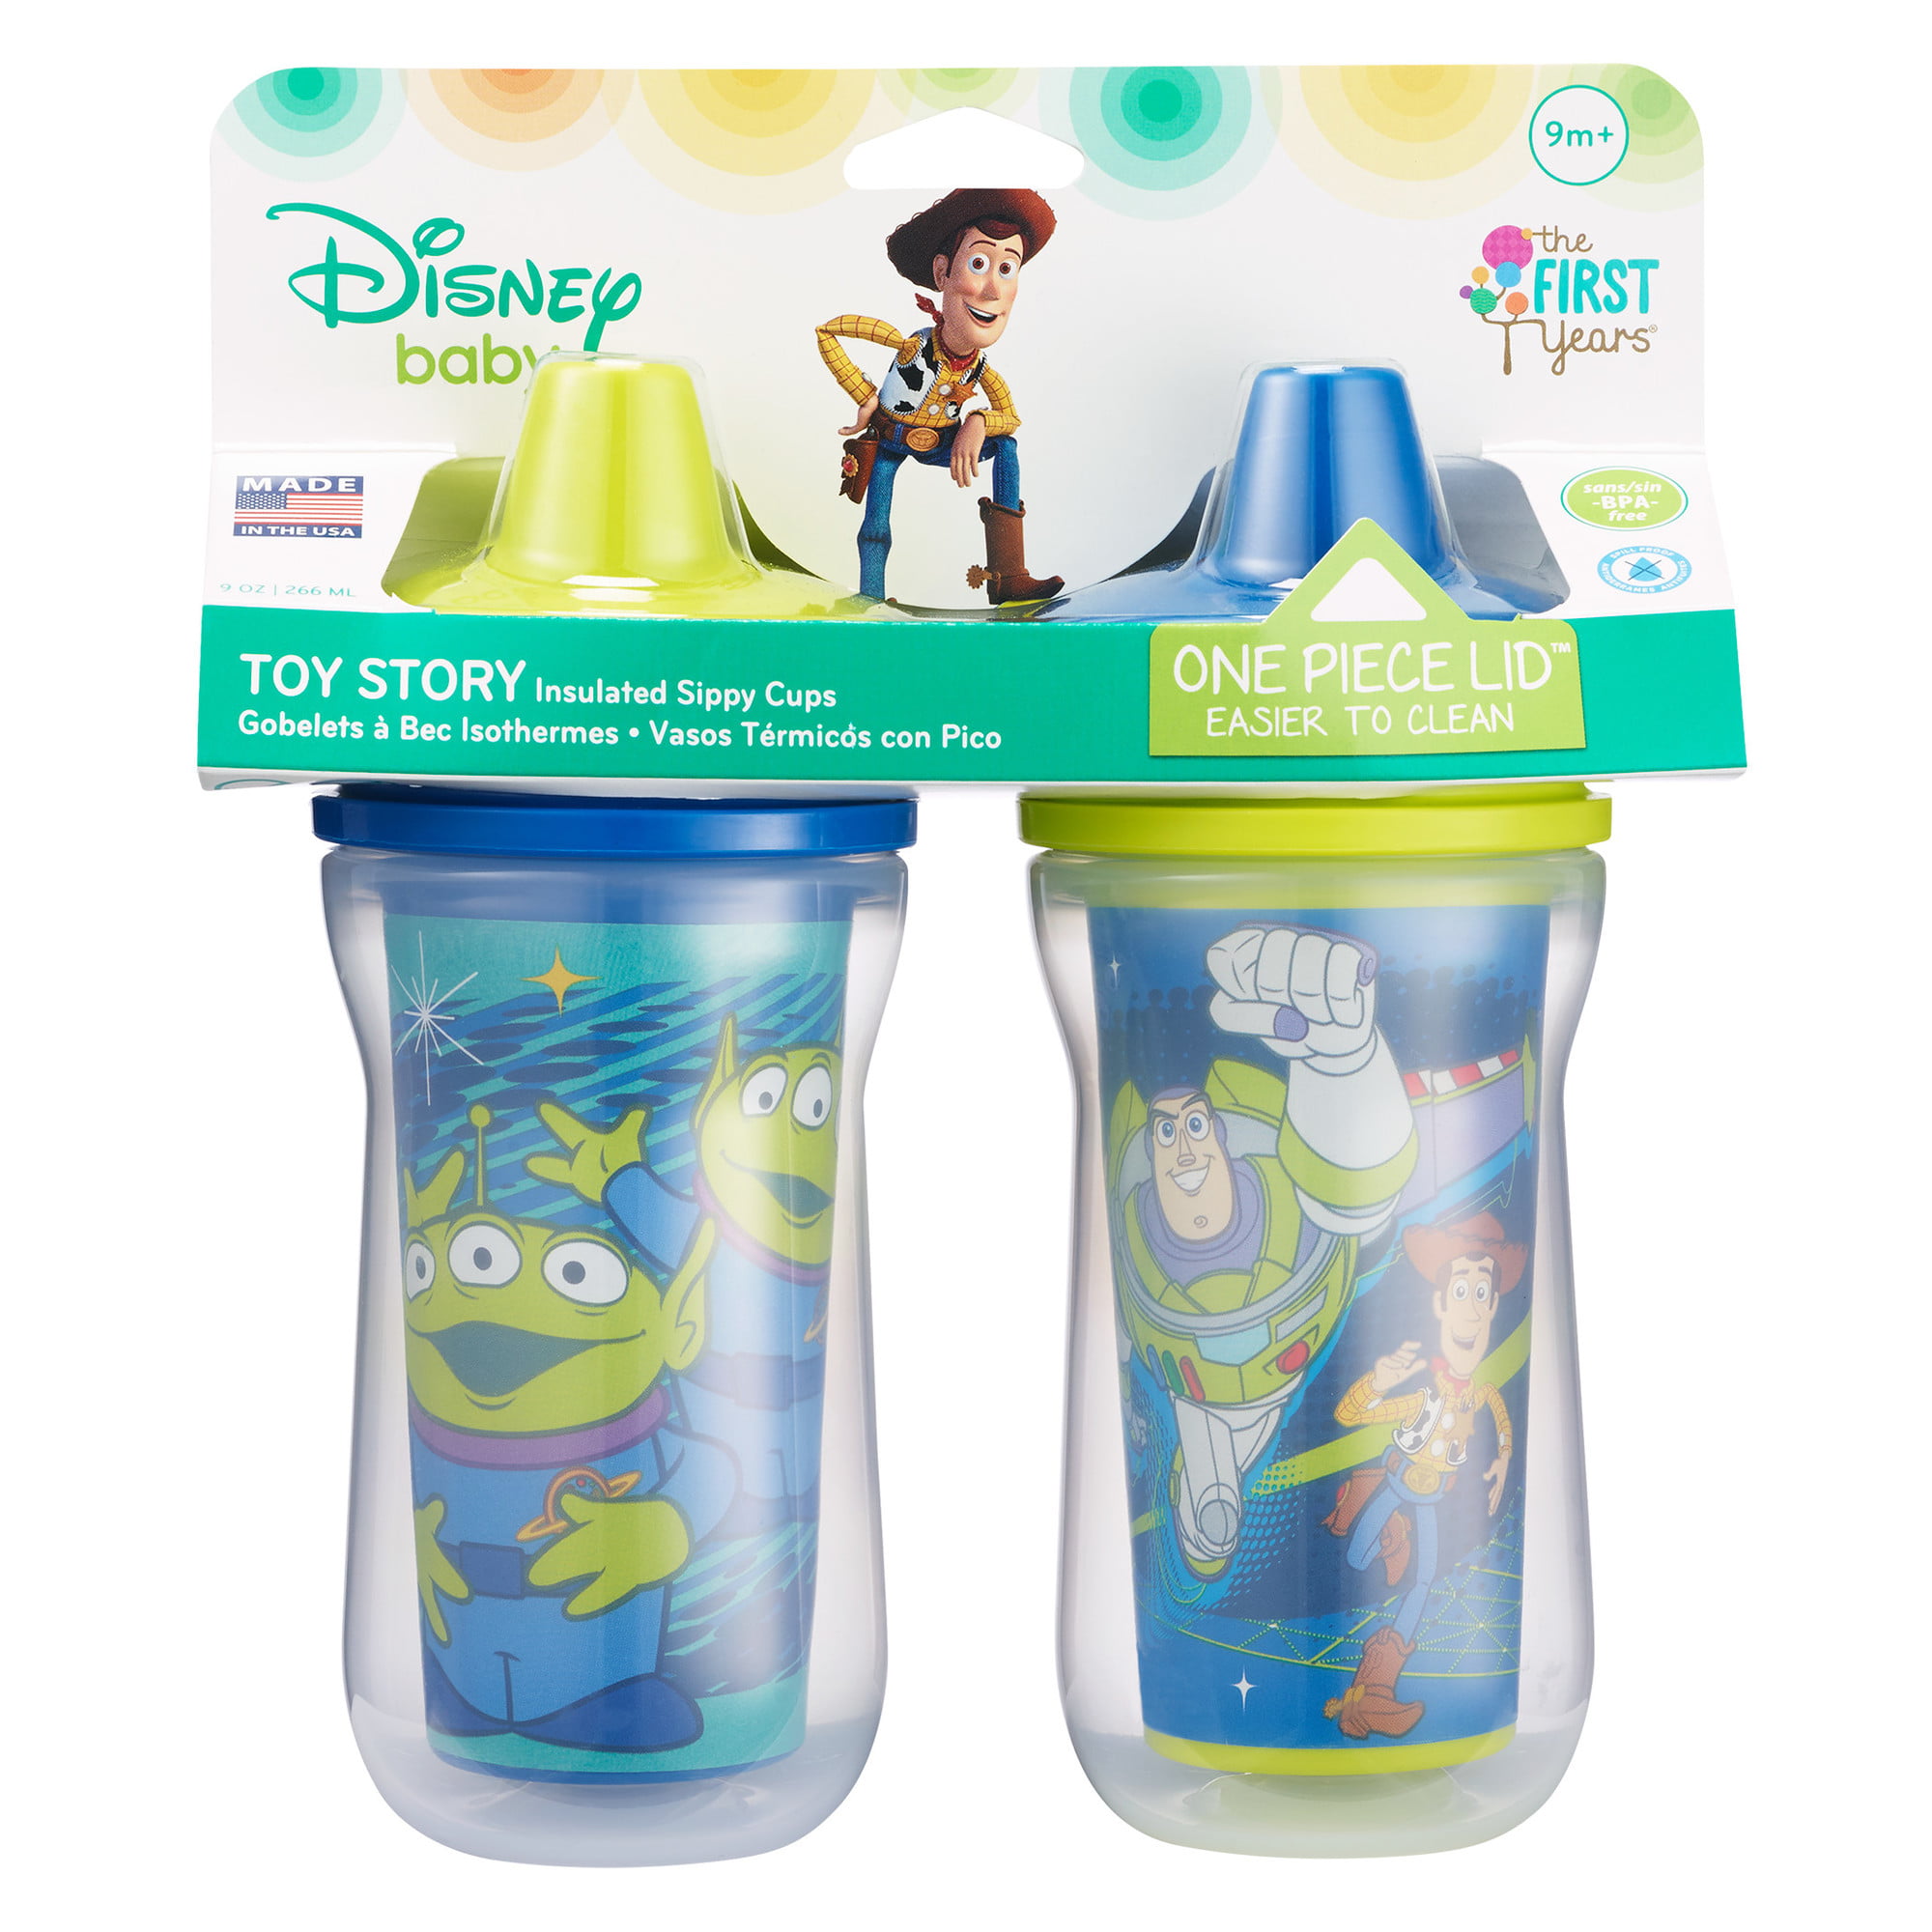 The First Years Disney/Pixar Toy Story Kids Insulated Sippy Cups -  Dishwasher Safe Spill Proof Toddler Cups - Ages 12 Months and Up - 9 Ounces  - 2 Count price in Saudi Arabia,  Saudi Arabia